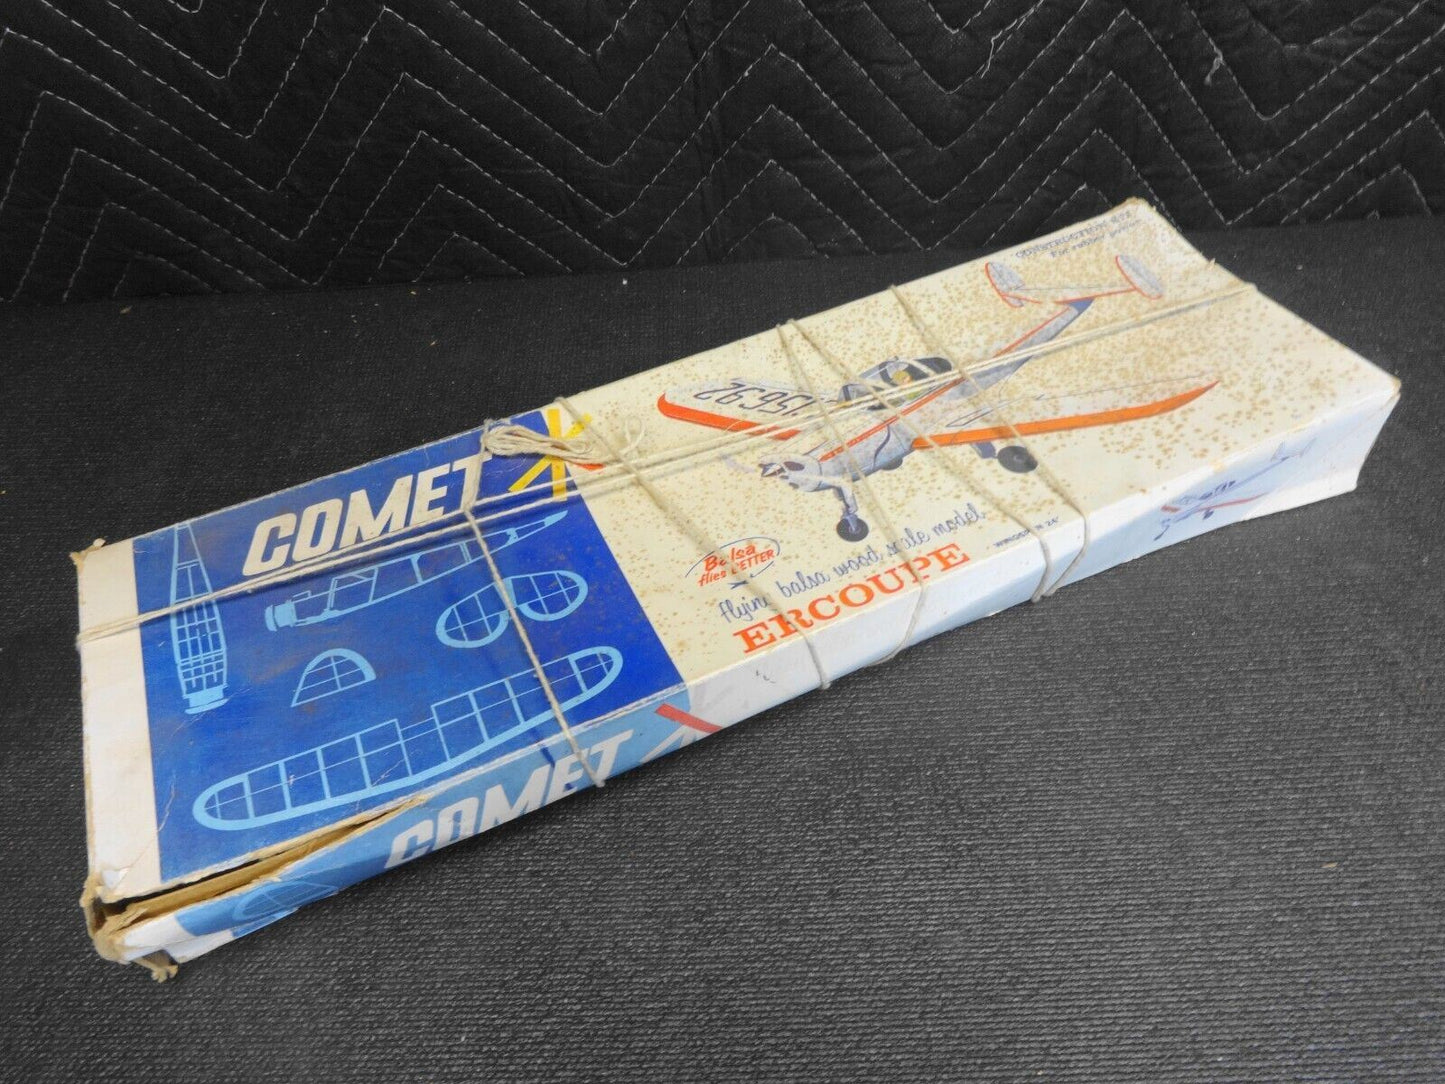 Vintage Comet Ercoupe Model Airplane Kit NOS - Distressed Box